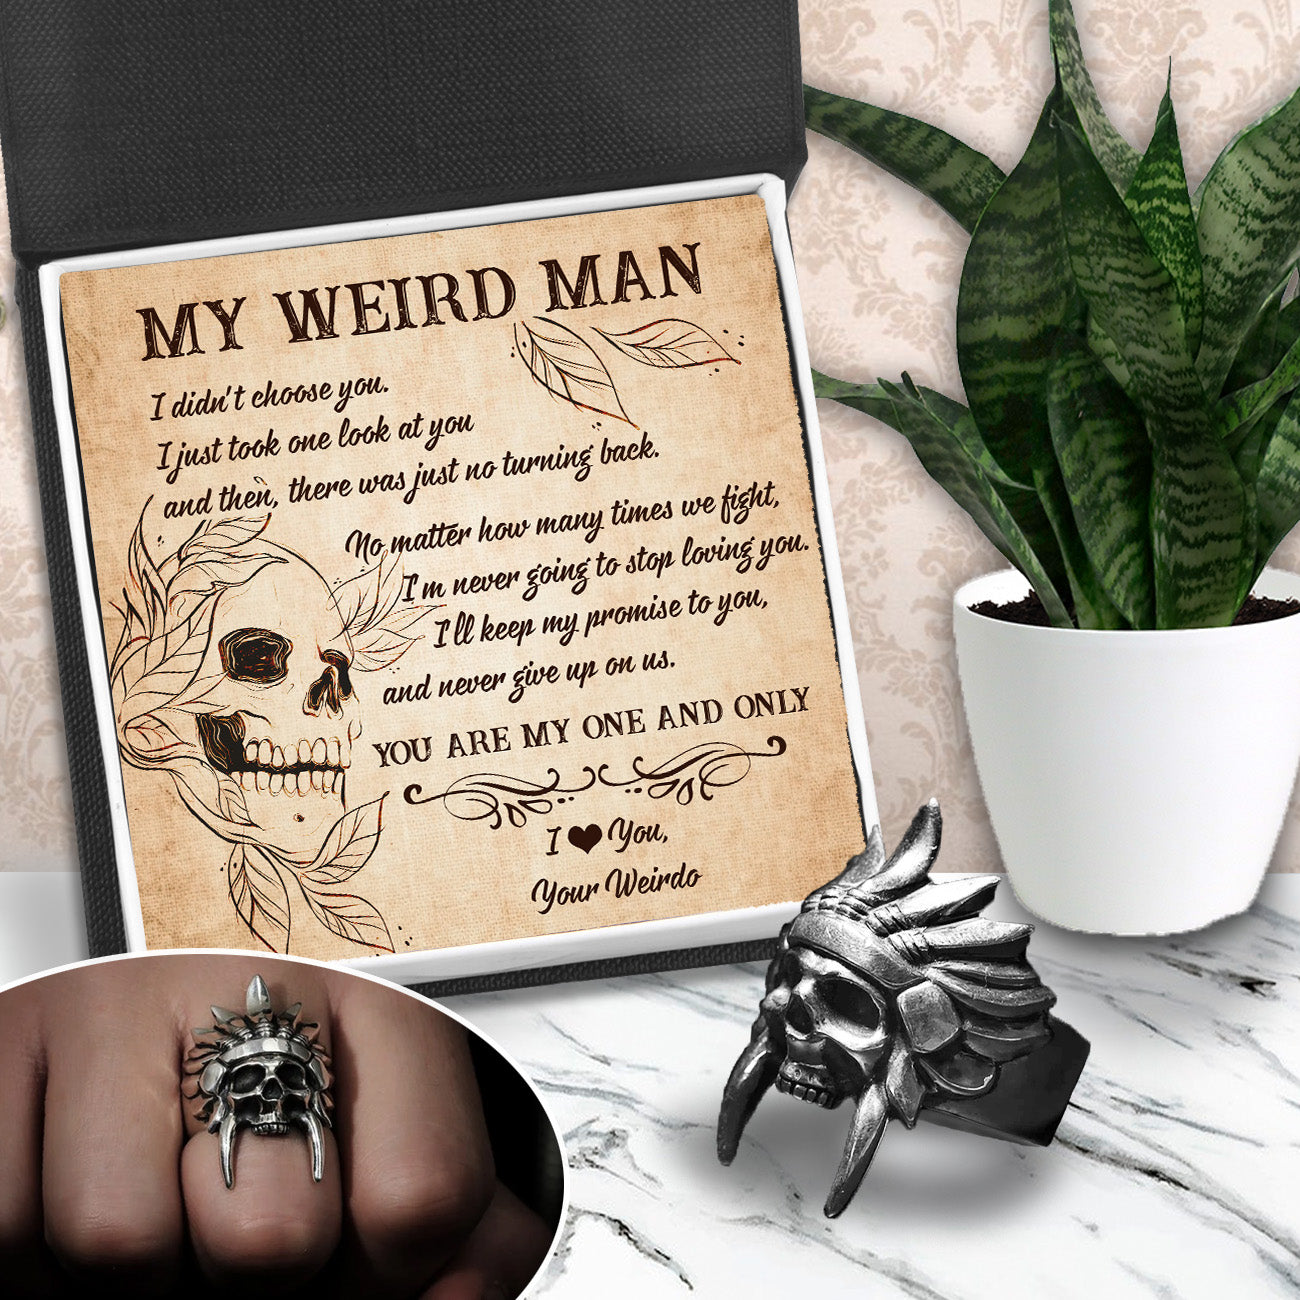 Christmas Gift Tribal Chief Ring - Skull & Tattoo - My Weird Man - You Are My One And Only